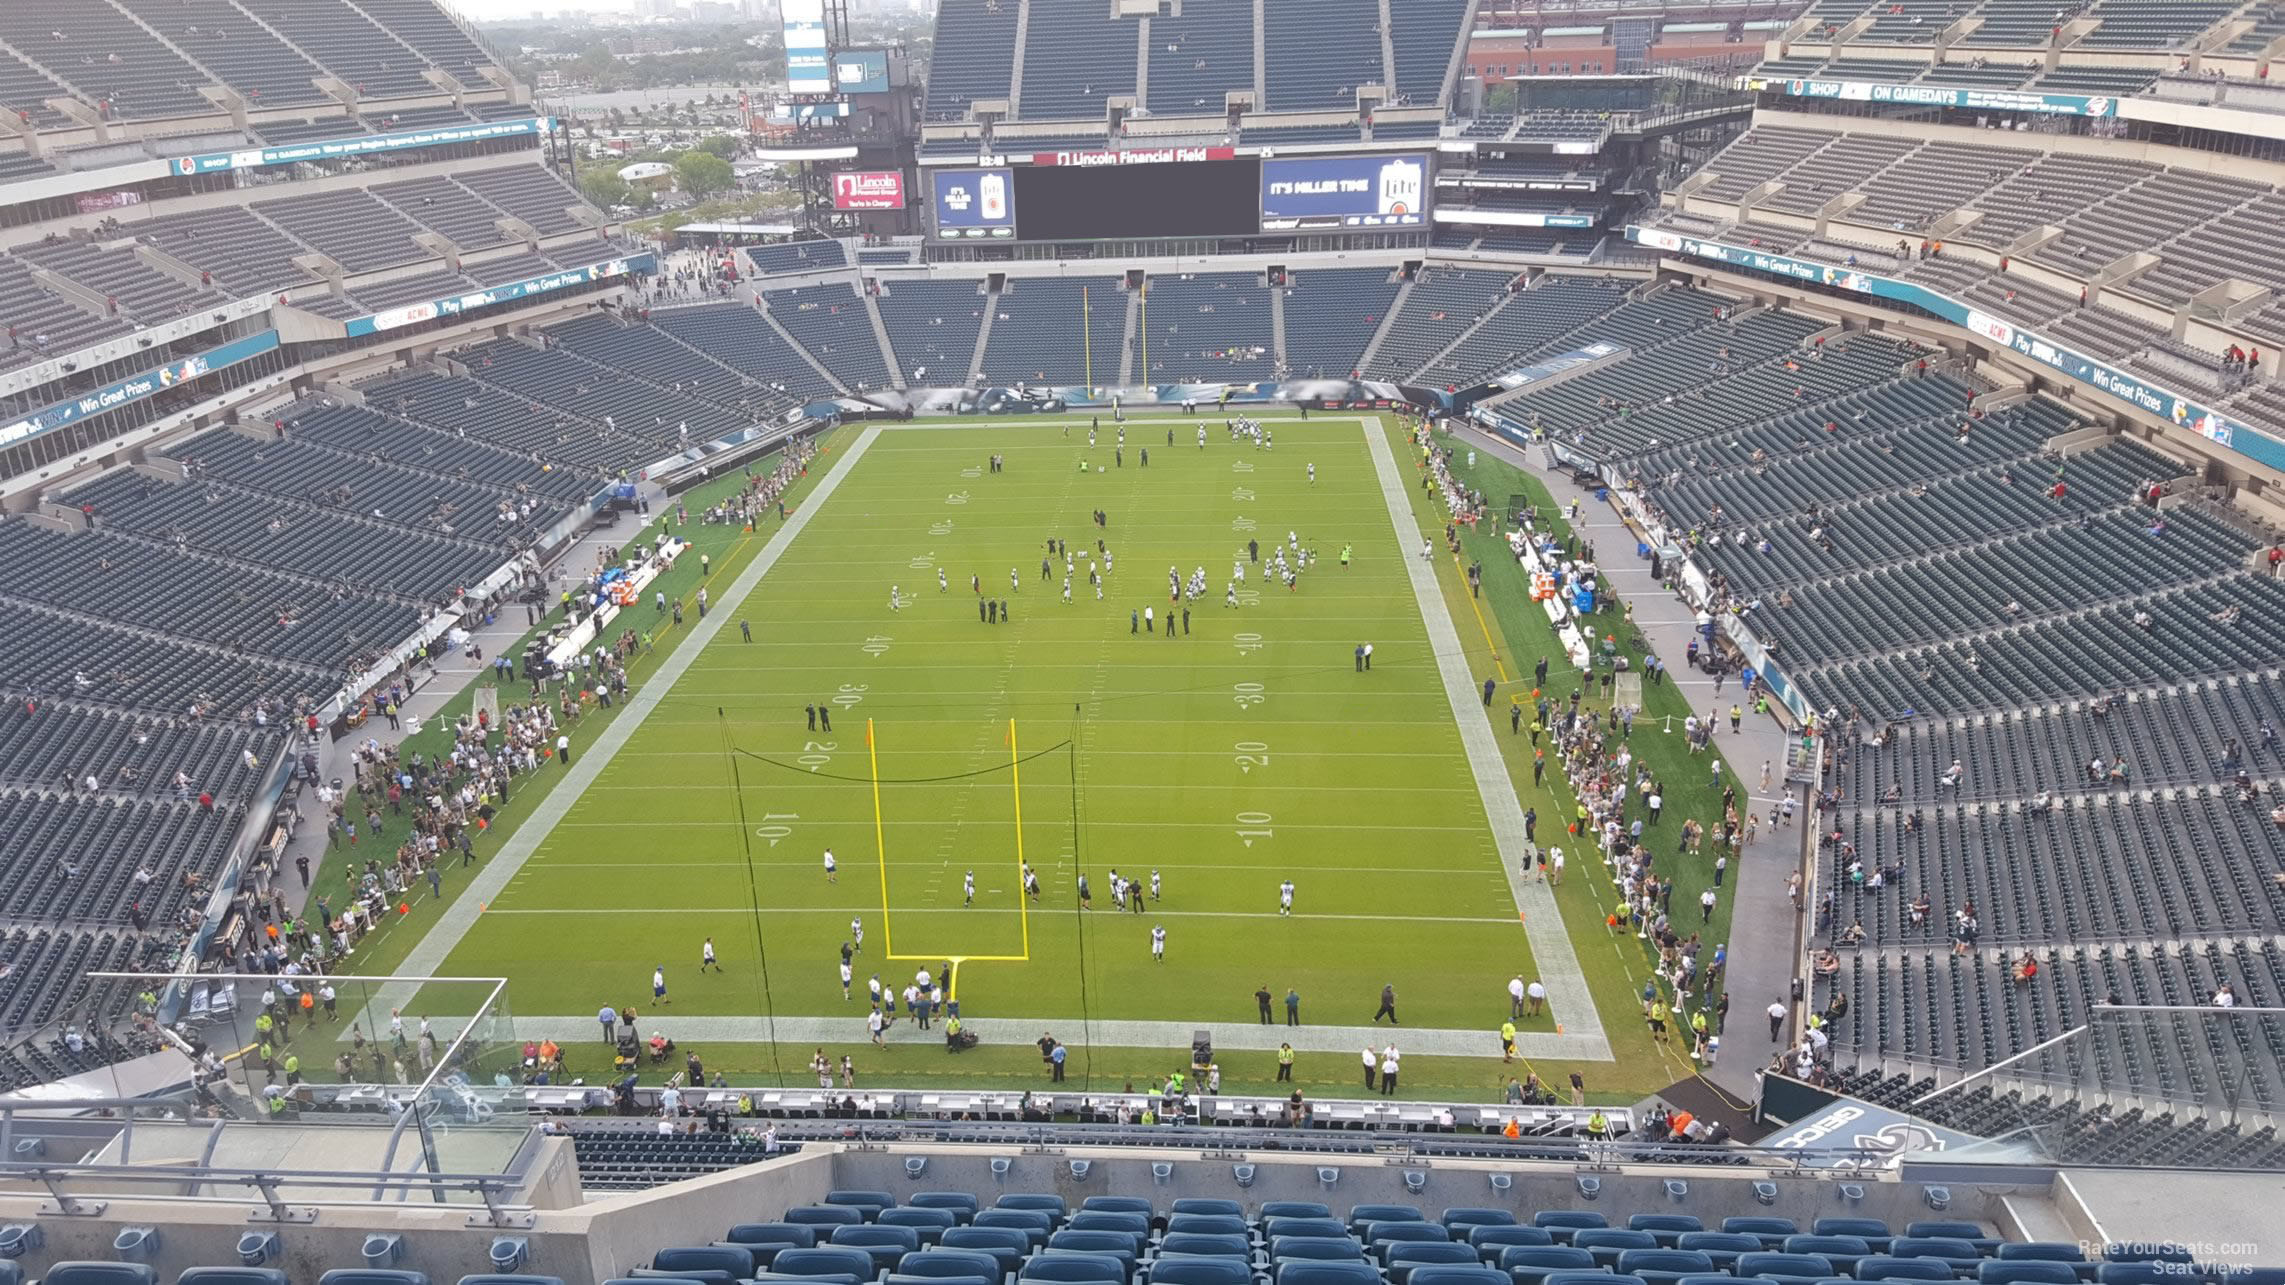 section 213, row 15 seat view  for football - lincoln financial field